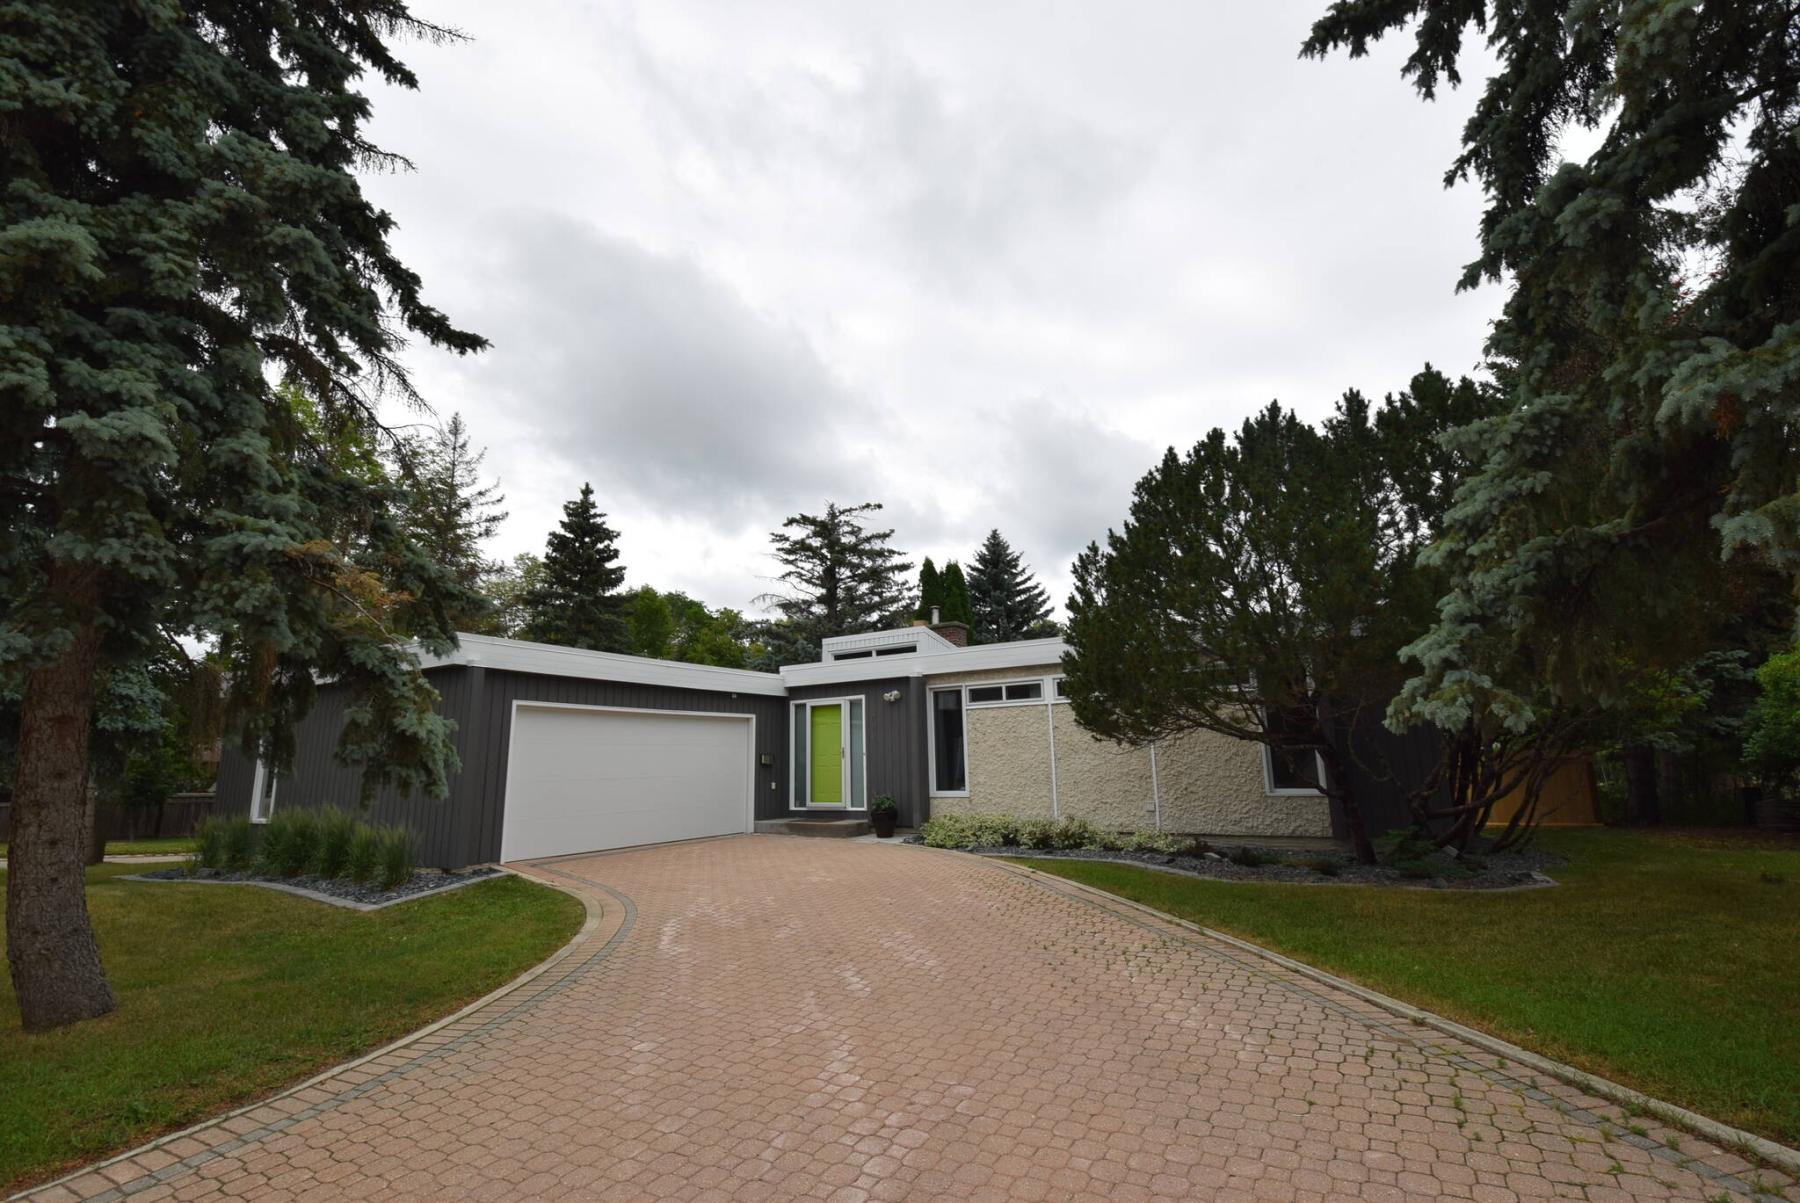  <p>Photos by Todd Lewys / Winnipeg Free Press</p>
                                <p>This mid-century-modern bungalow has been lovingly maintained, meticulously updated and sits on a private, well-treed peninsula-style lot.</p> 